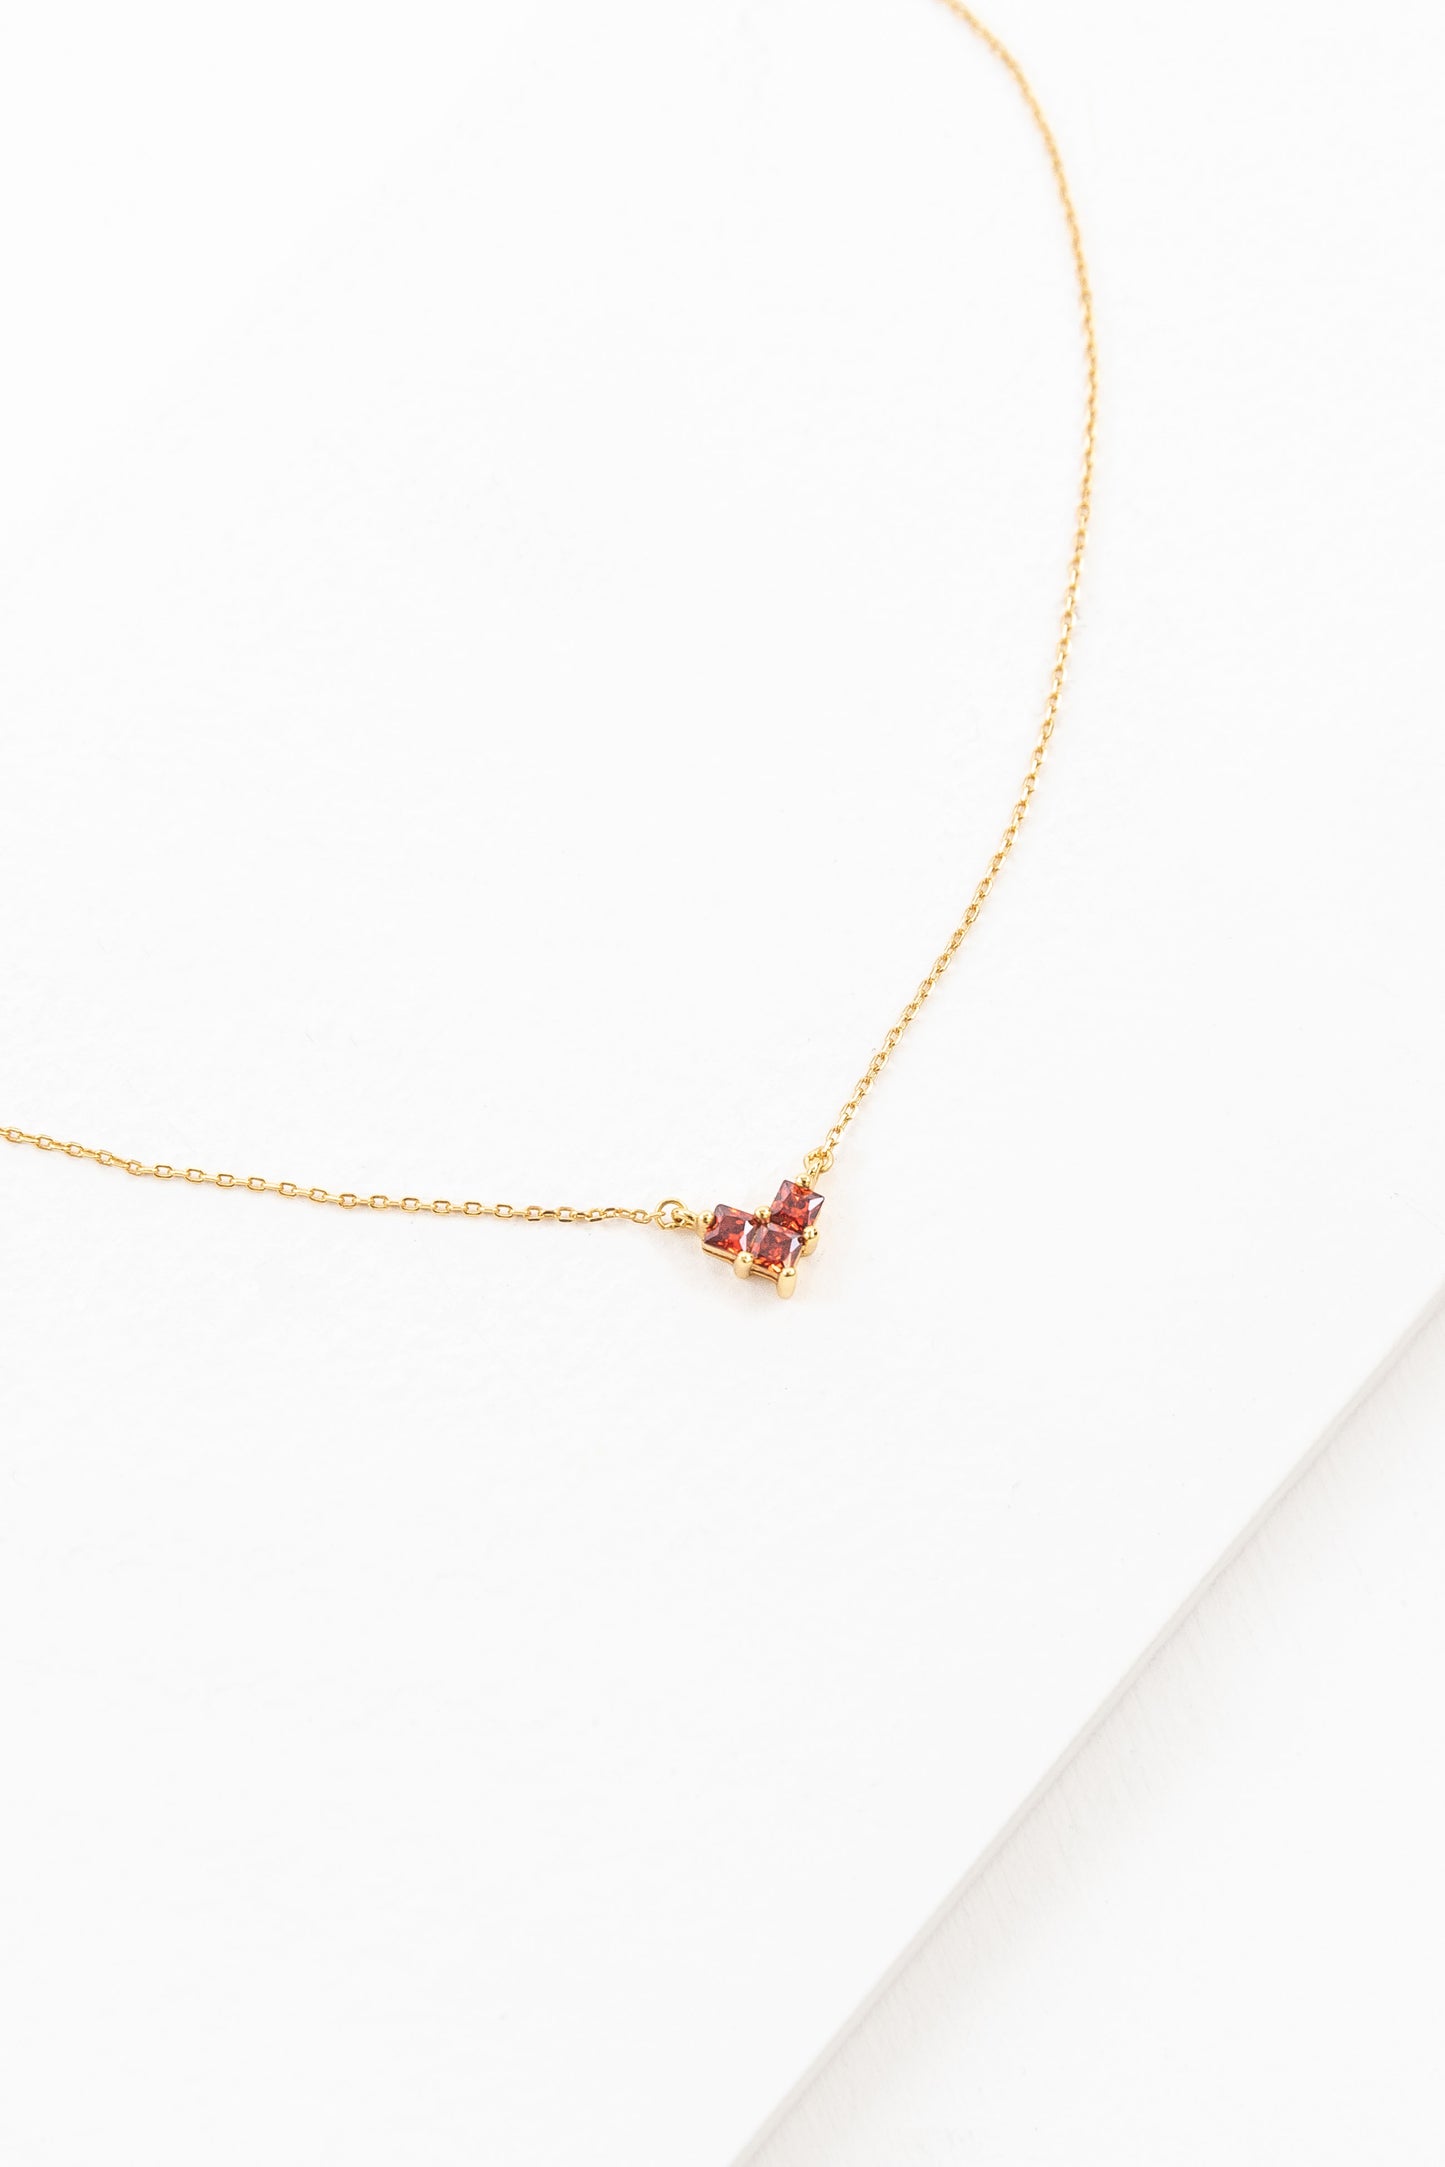 All My Love Necklace (14K)